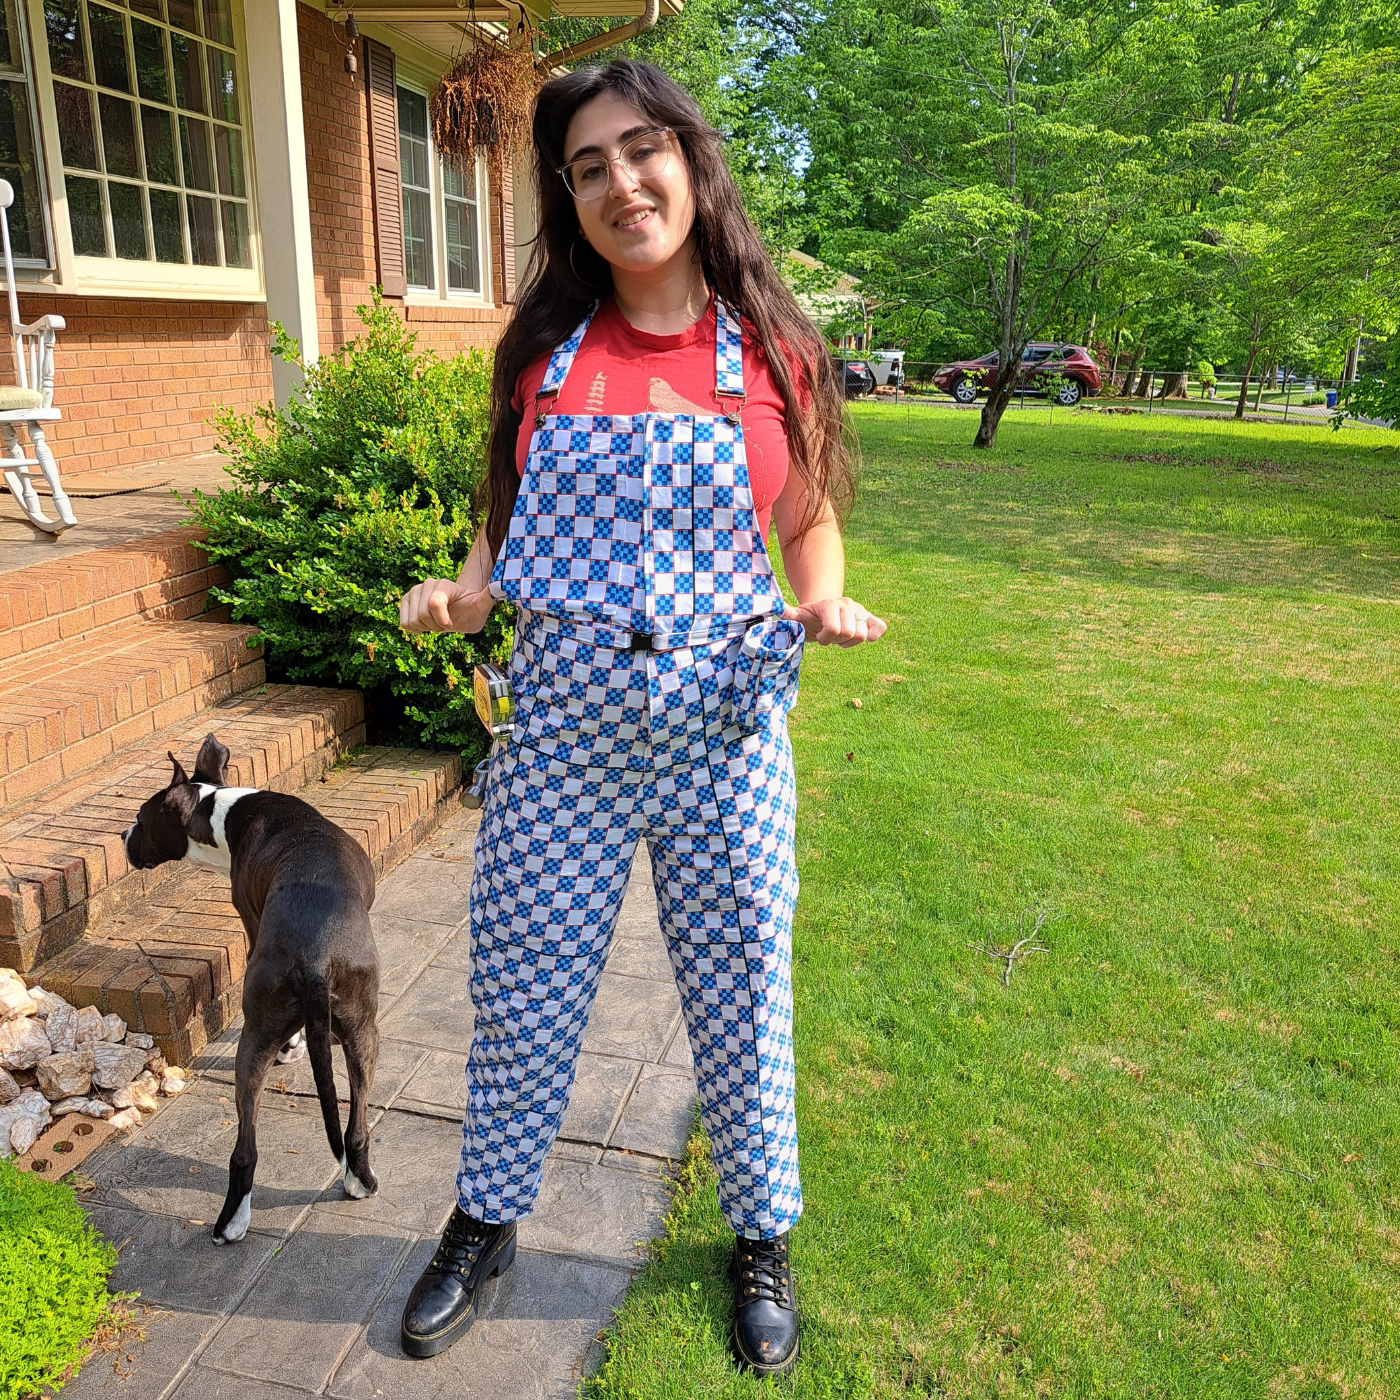 Ace stands smiling in front of a red brick house in a grass yard wearing a pair of overalls in a print featuring a checkerboard design that also doubles as a ruler. The checkerboard is white and small-blue-and-navy blocks with all blocks outlined in red. A black dog with white accents is standing by their right foot.